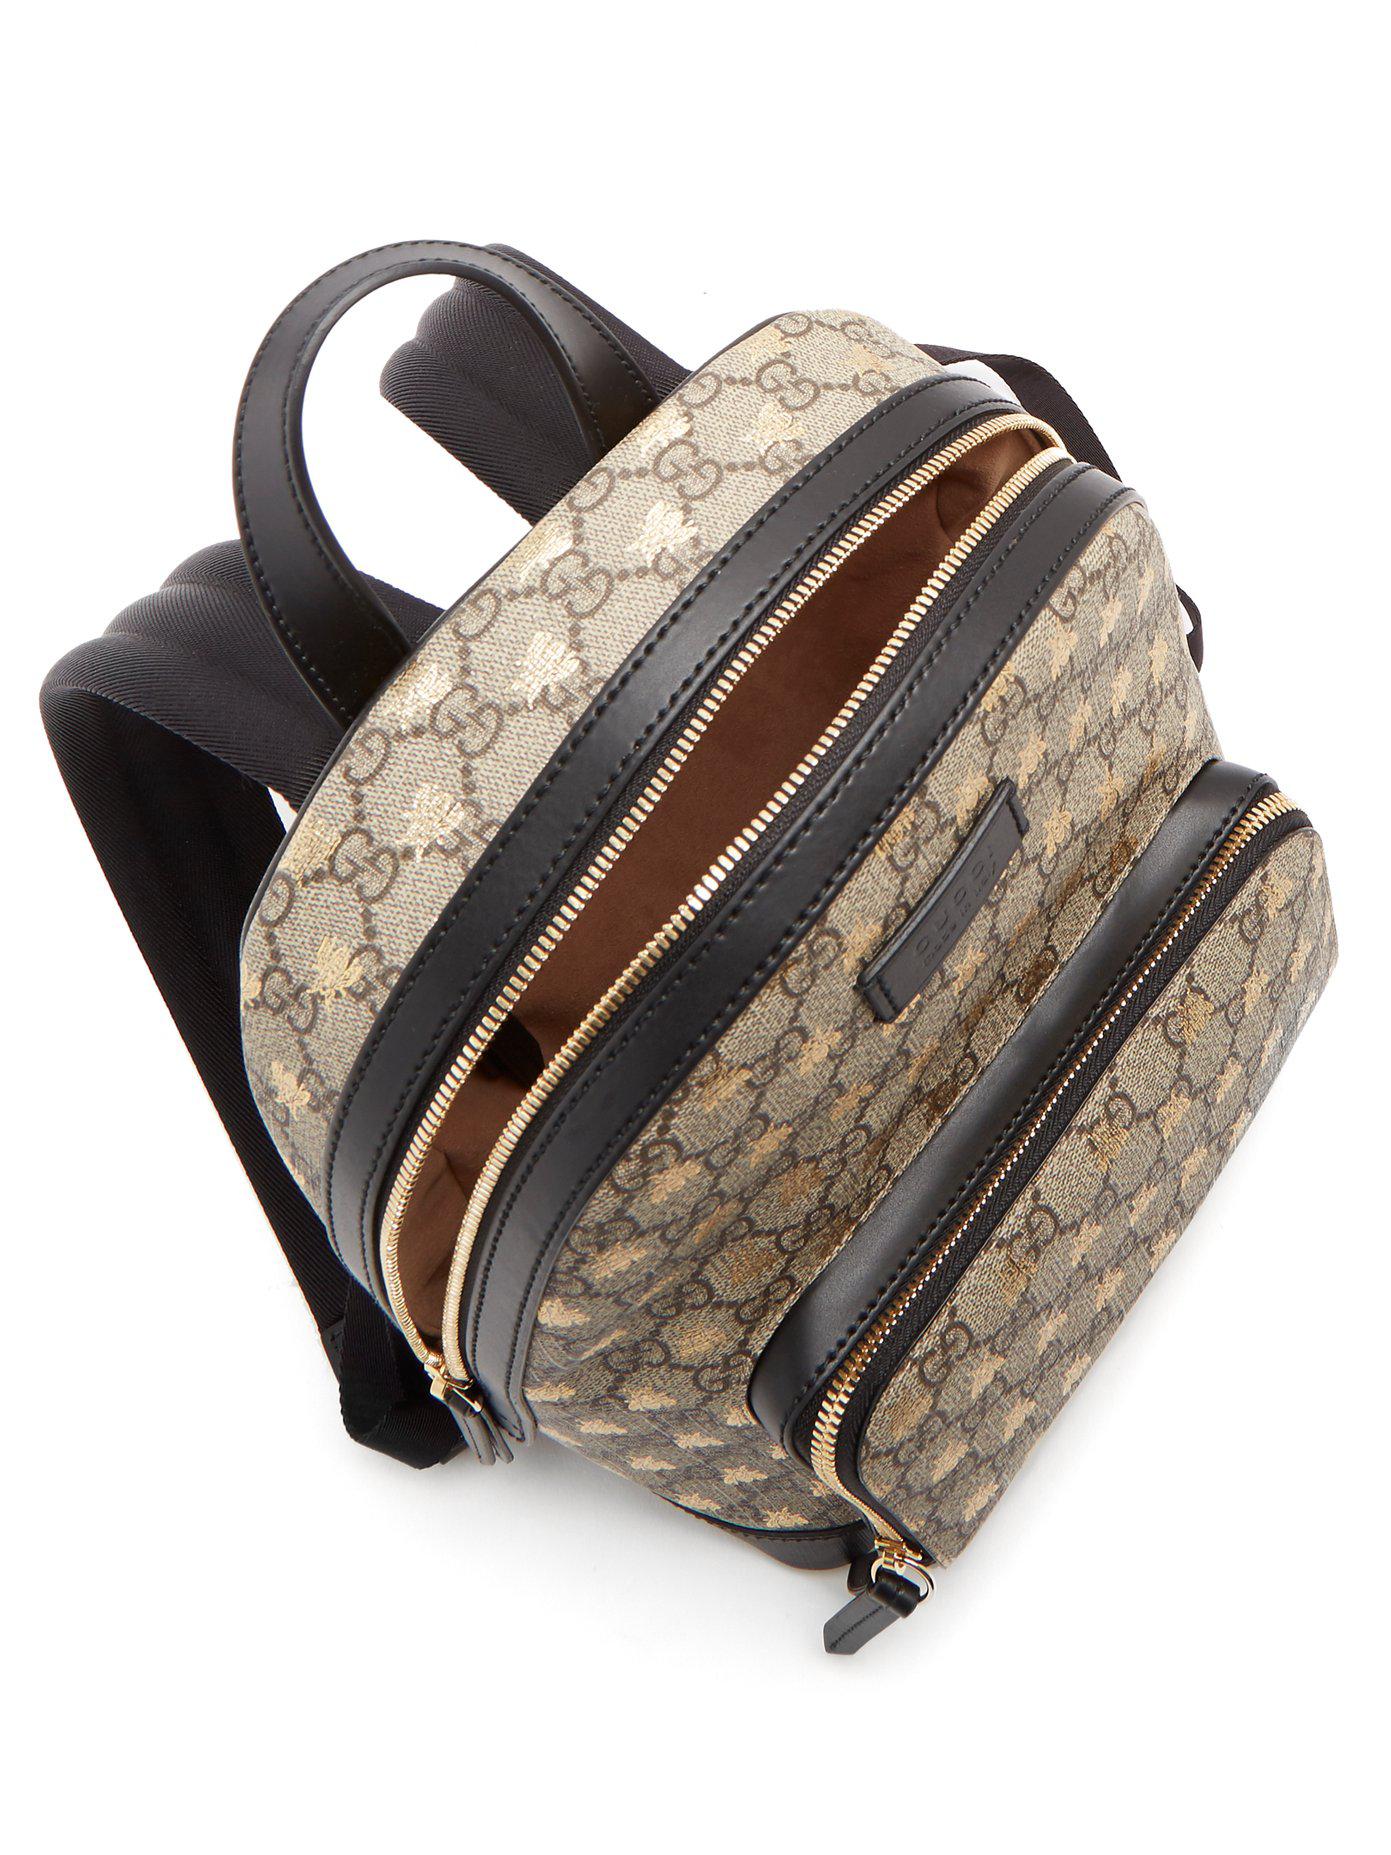 Gucci Gg Supreme Bee-print Backpack in Brown | Lyst